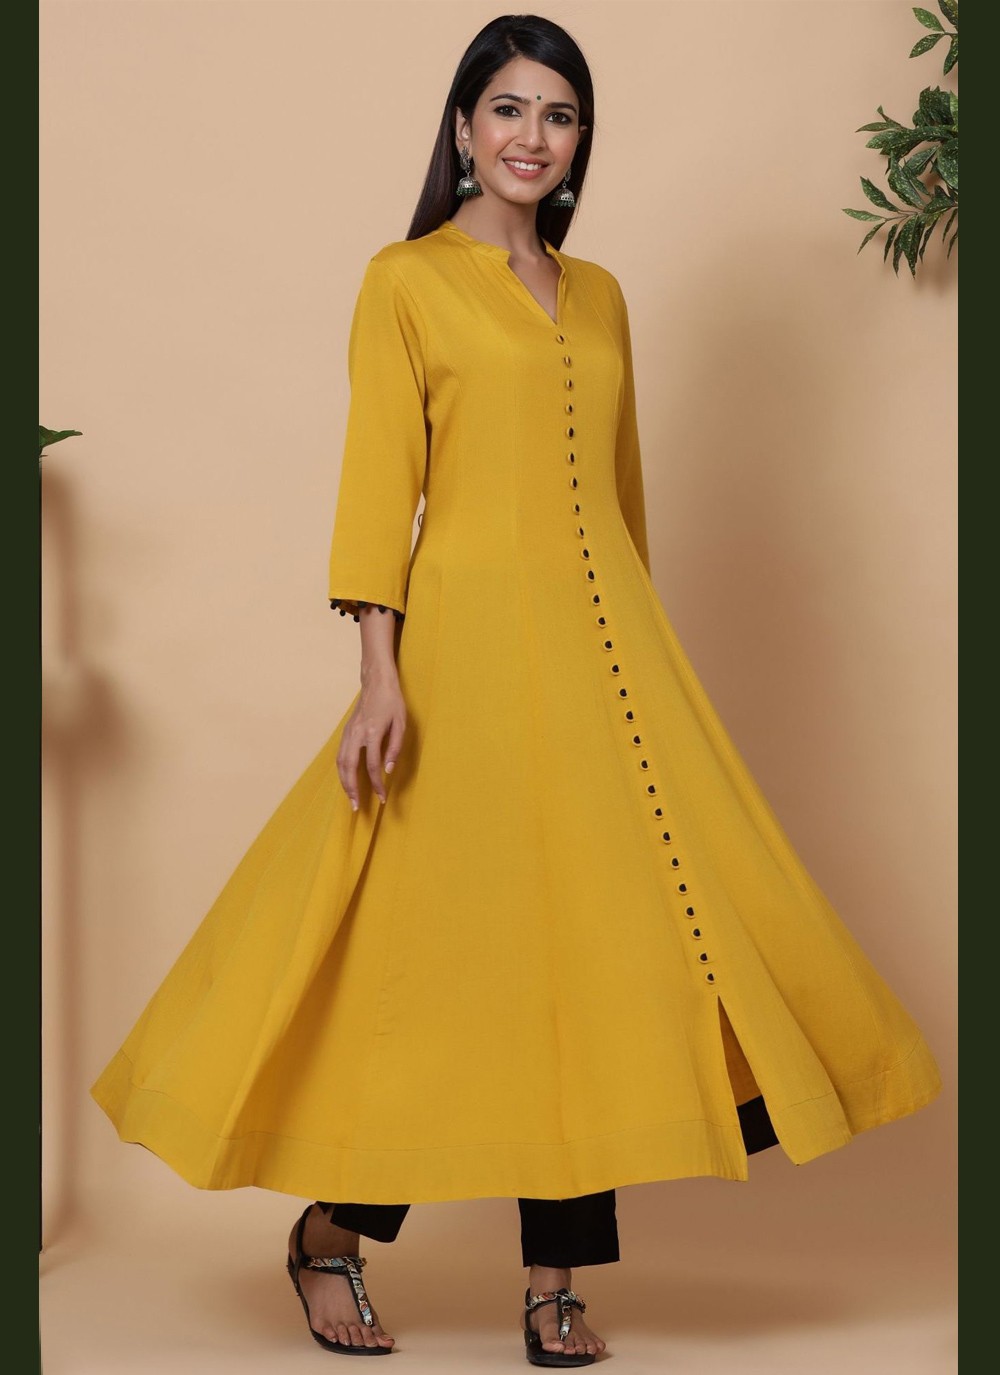 Shop Online Exclusive Designer New Arrival Latest Fashion Trend for Women   Free Shipping in India  Lady India